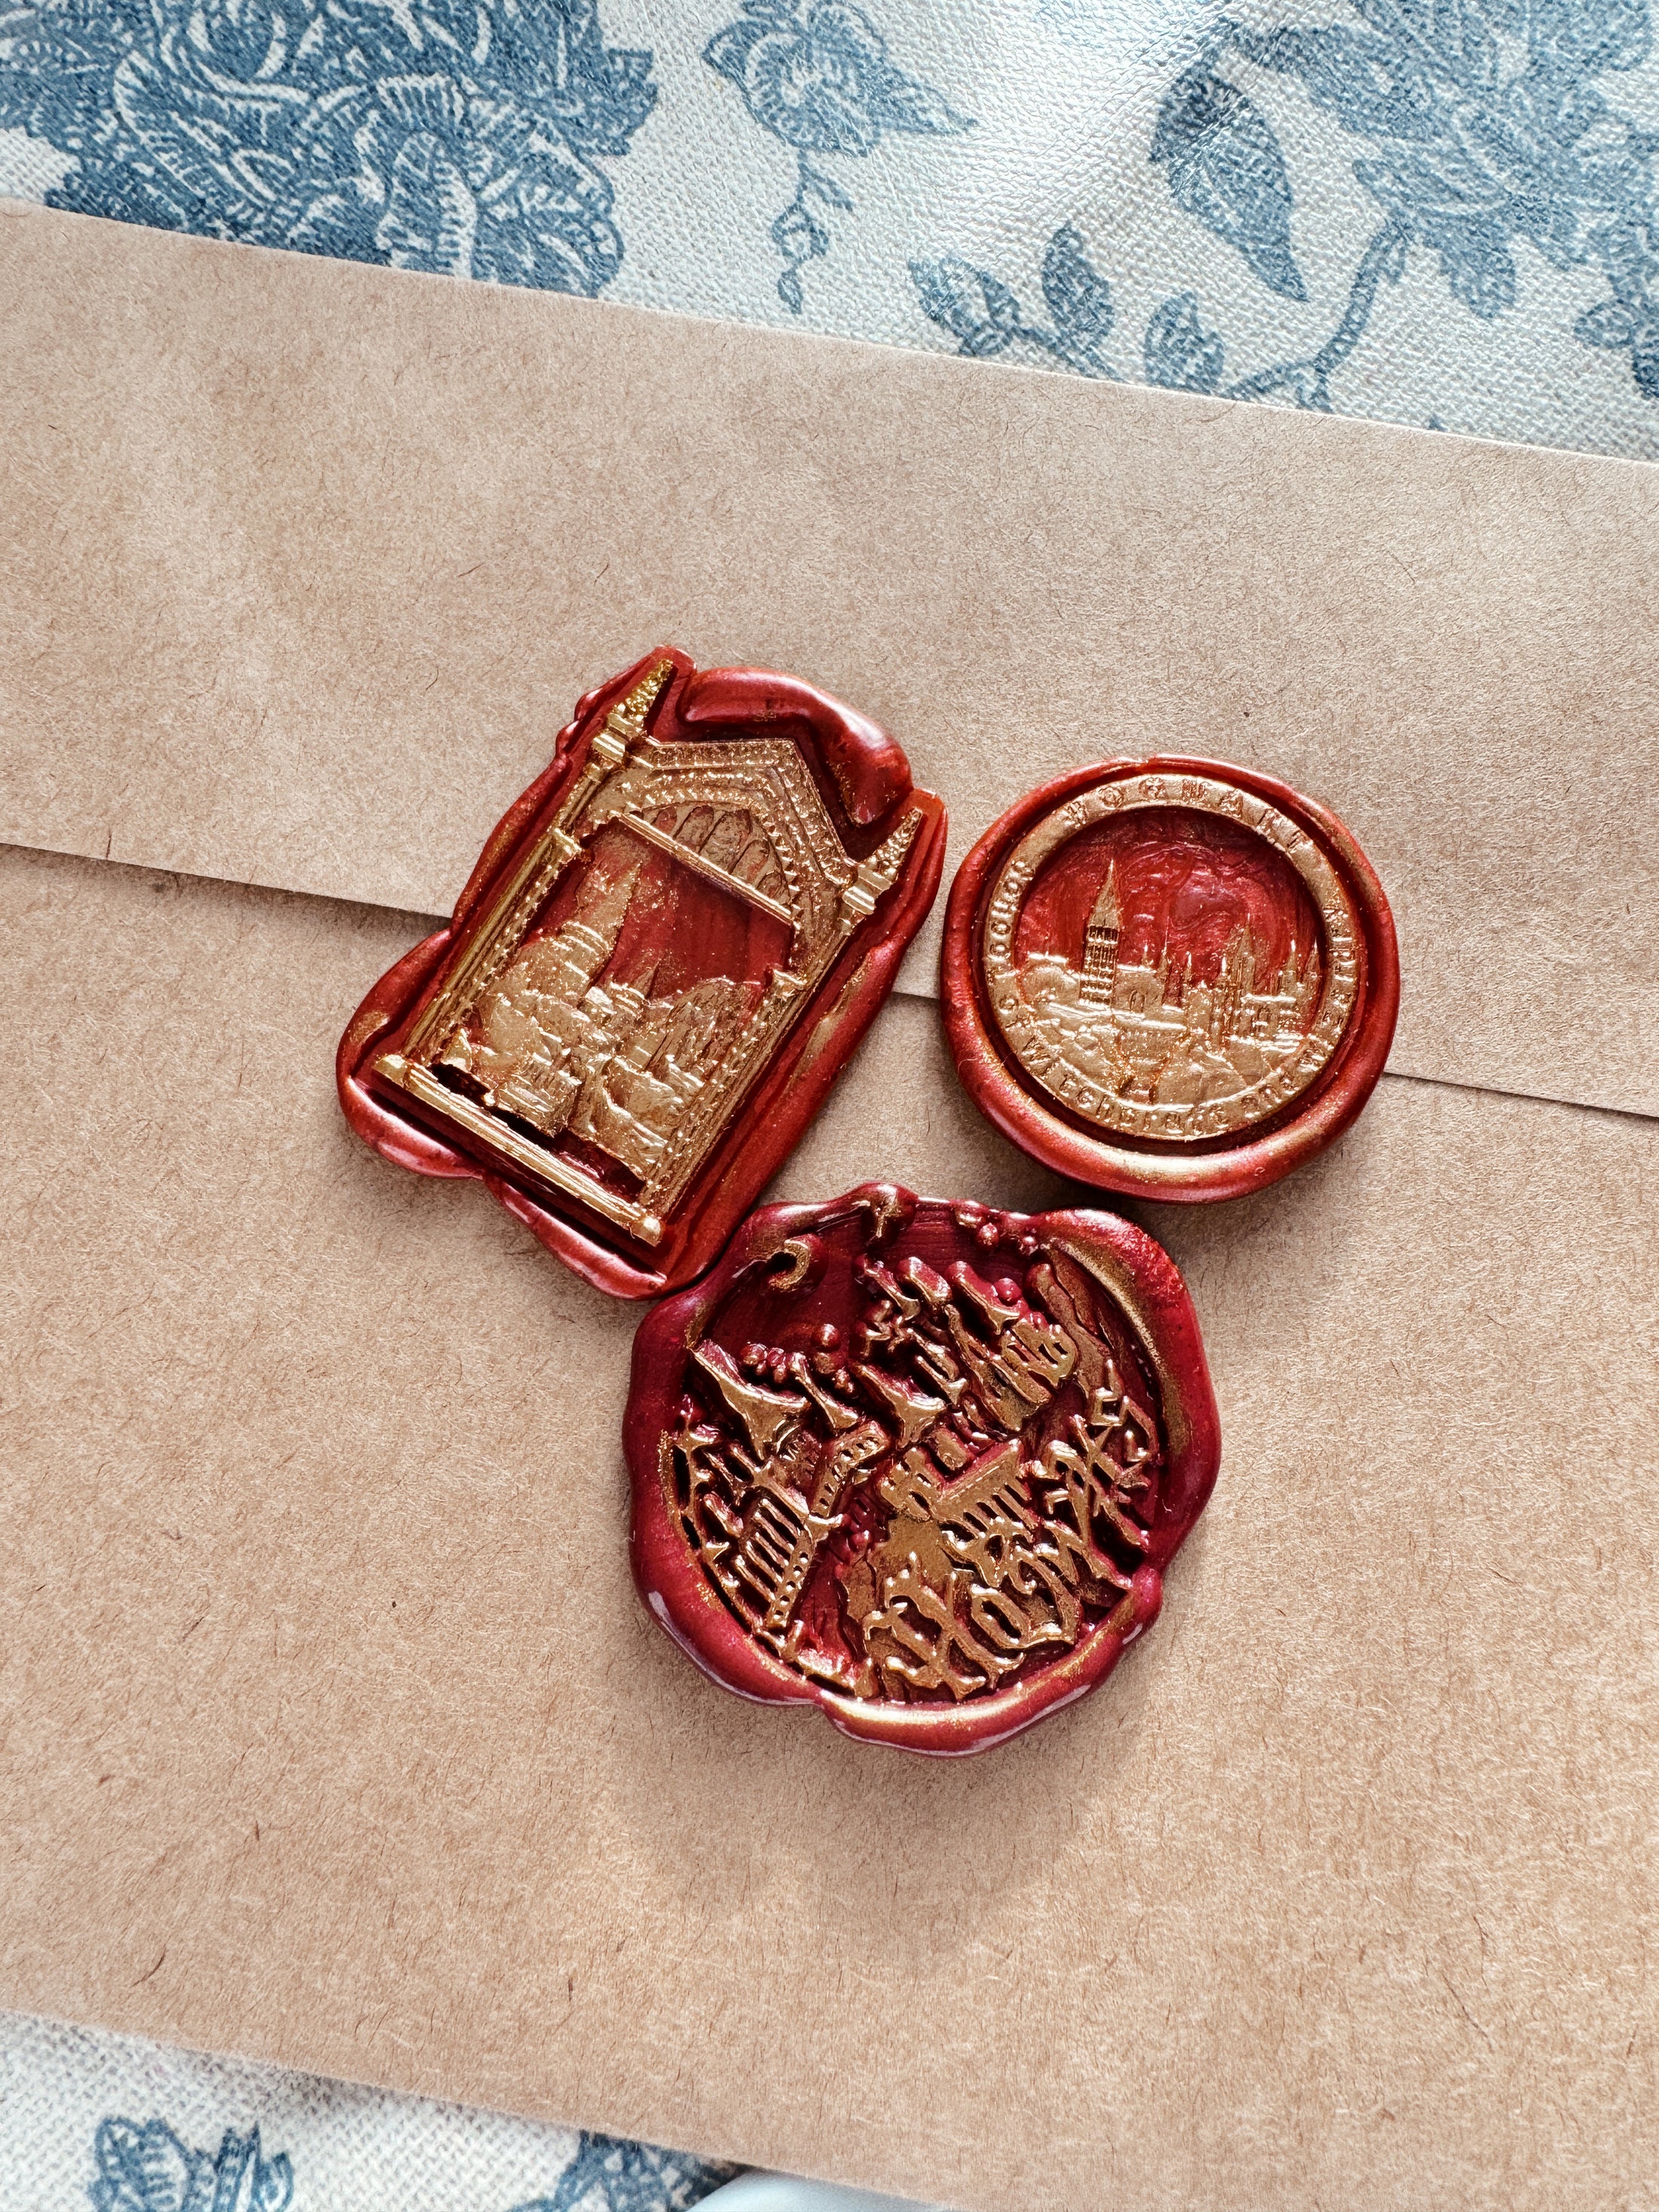 The Castle Wax Seal Sticker Pack